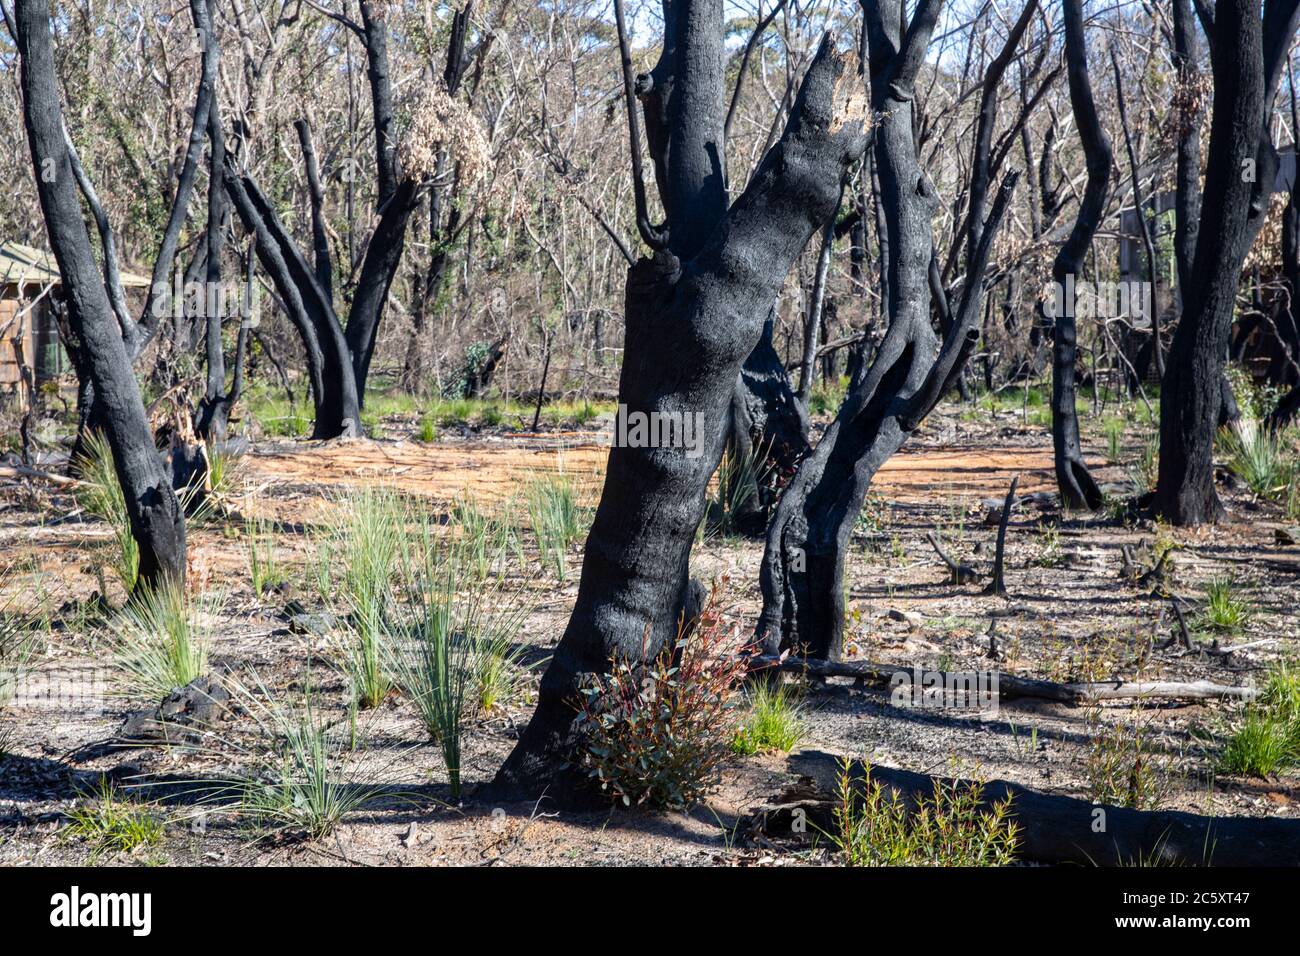 Australia bush foires 2020 in Blue mountains national park nsw with green shoots of recovery post the fires,Australia Stock Photo